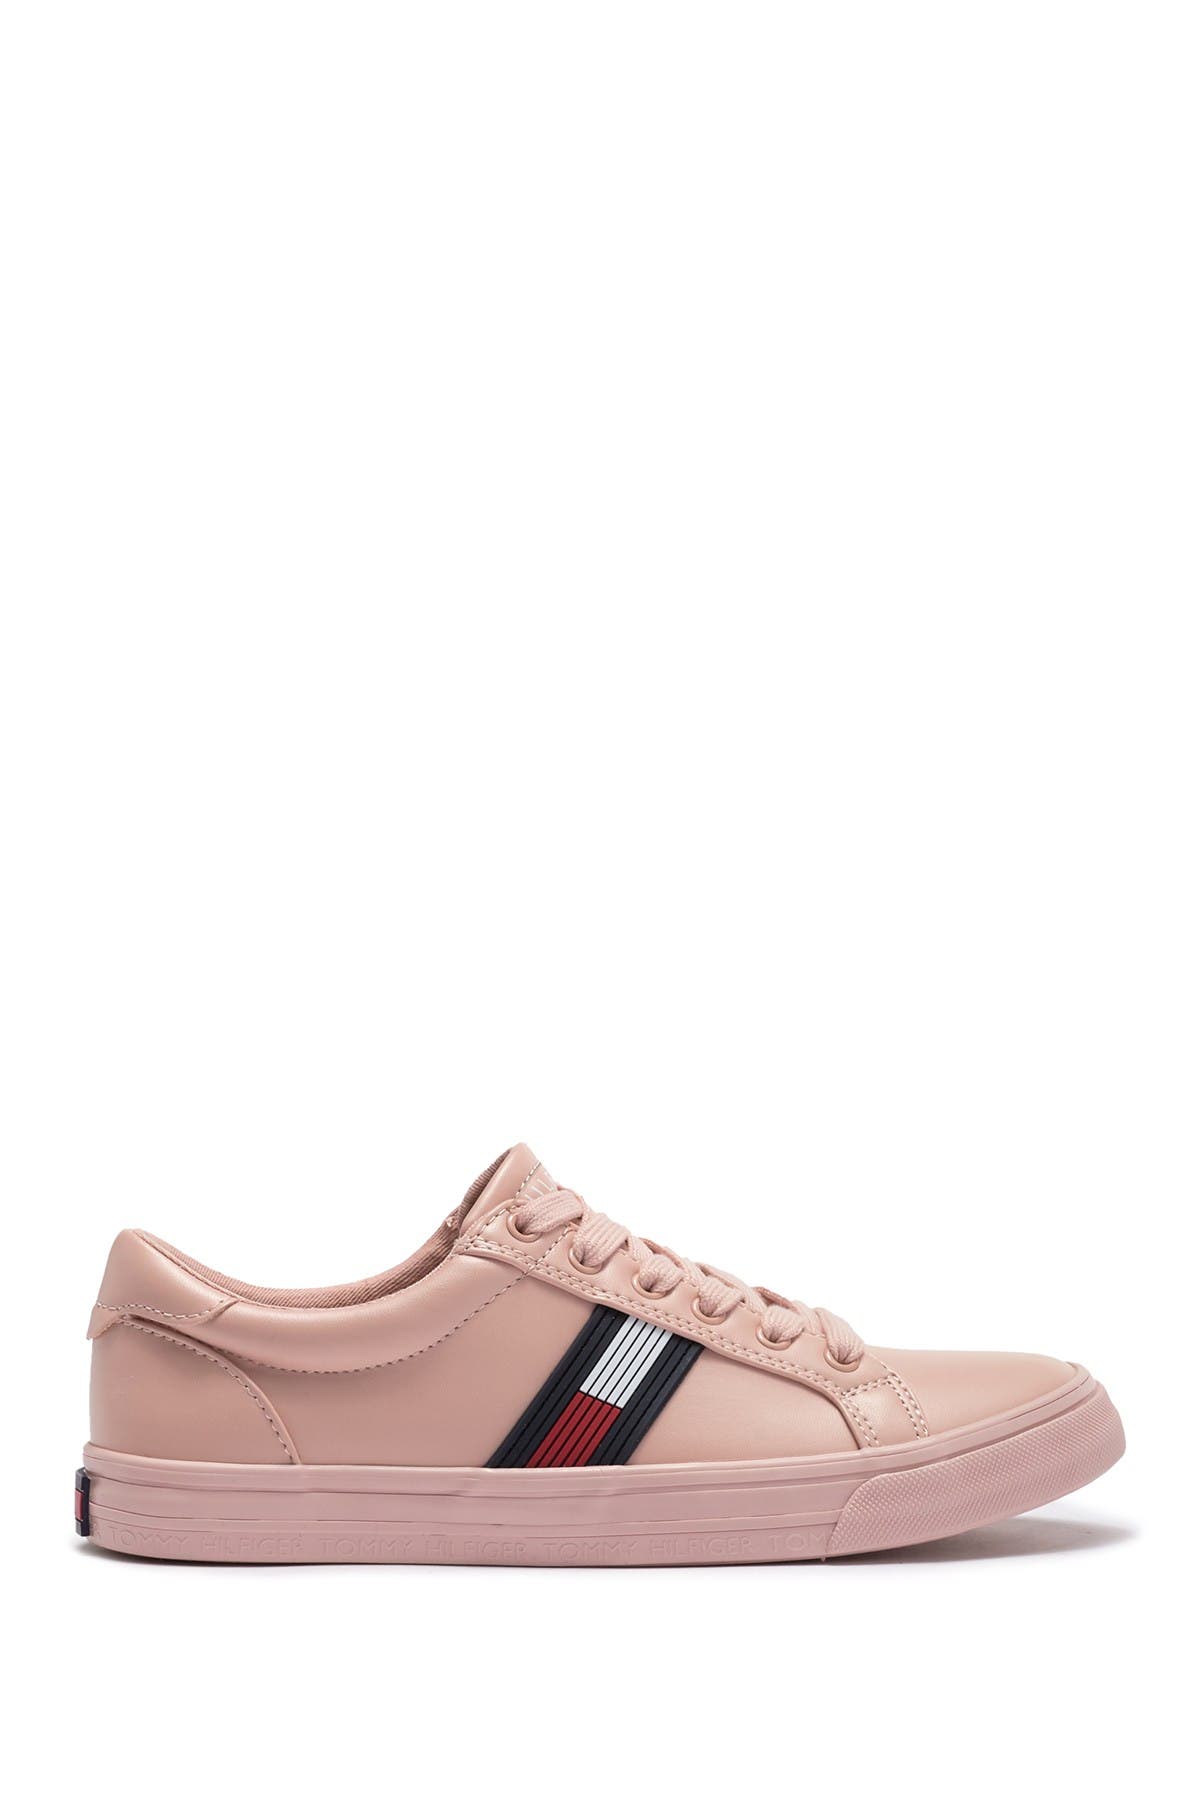 tommy hilfiger oneas